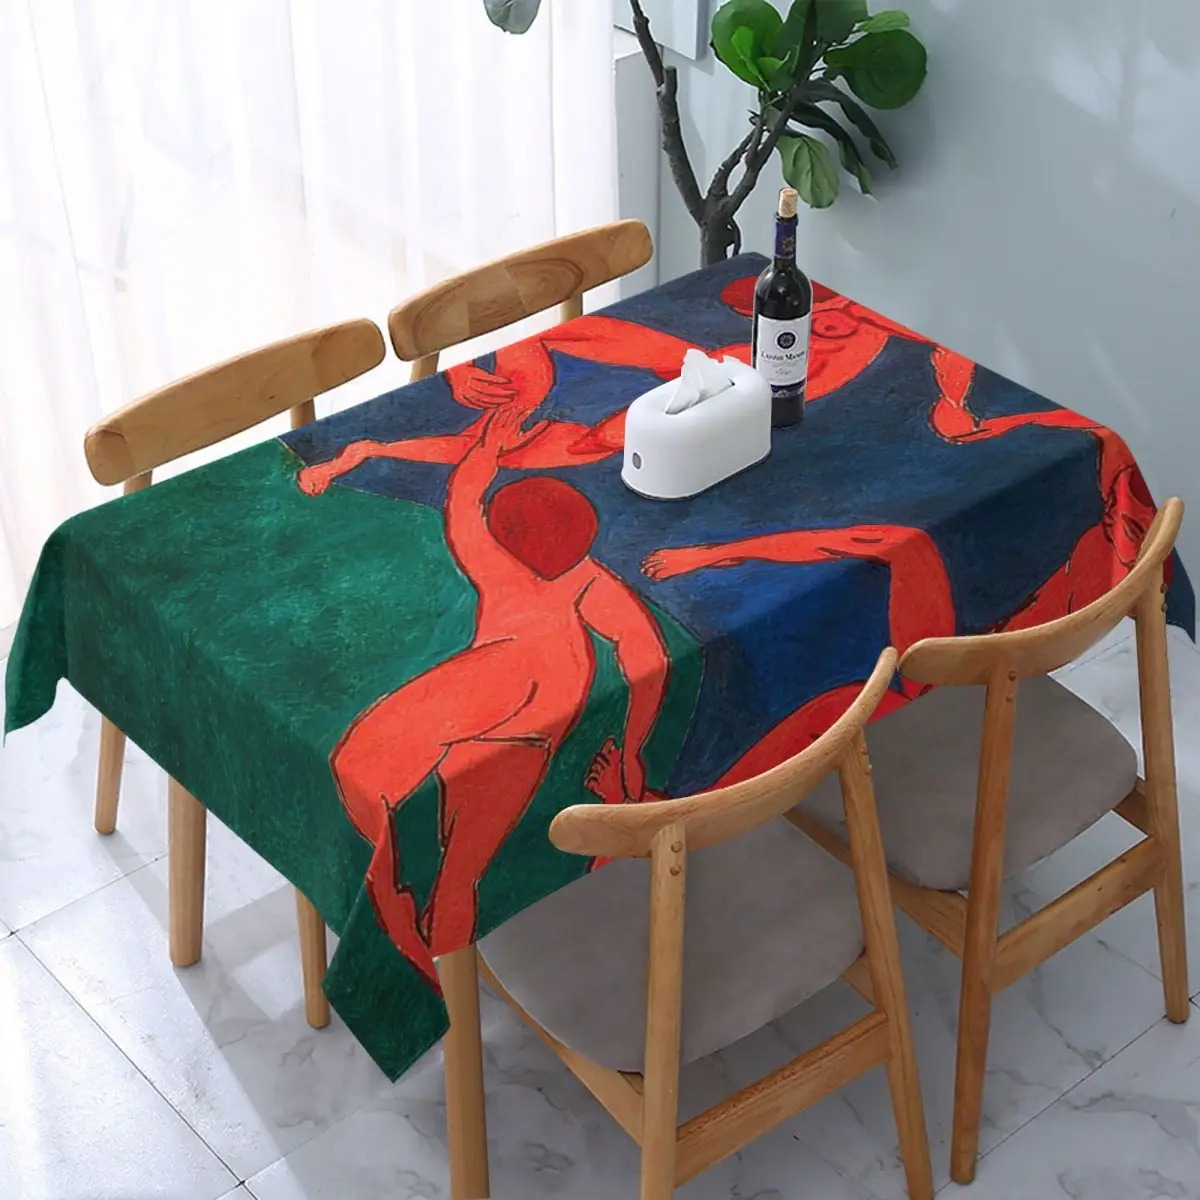 

Rectangular Waterproof Oil-Proof The Dance By Henri Matisse Tablecloth Backed Elastic Edge Table Cover 45"-50" Fit Table Cloth